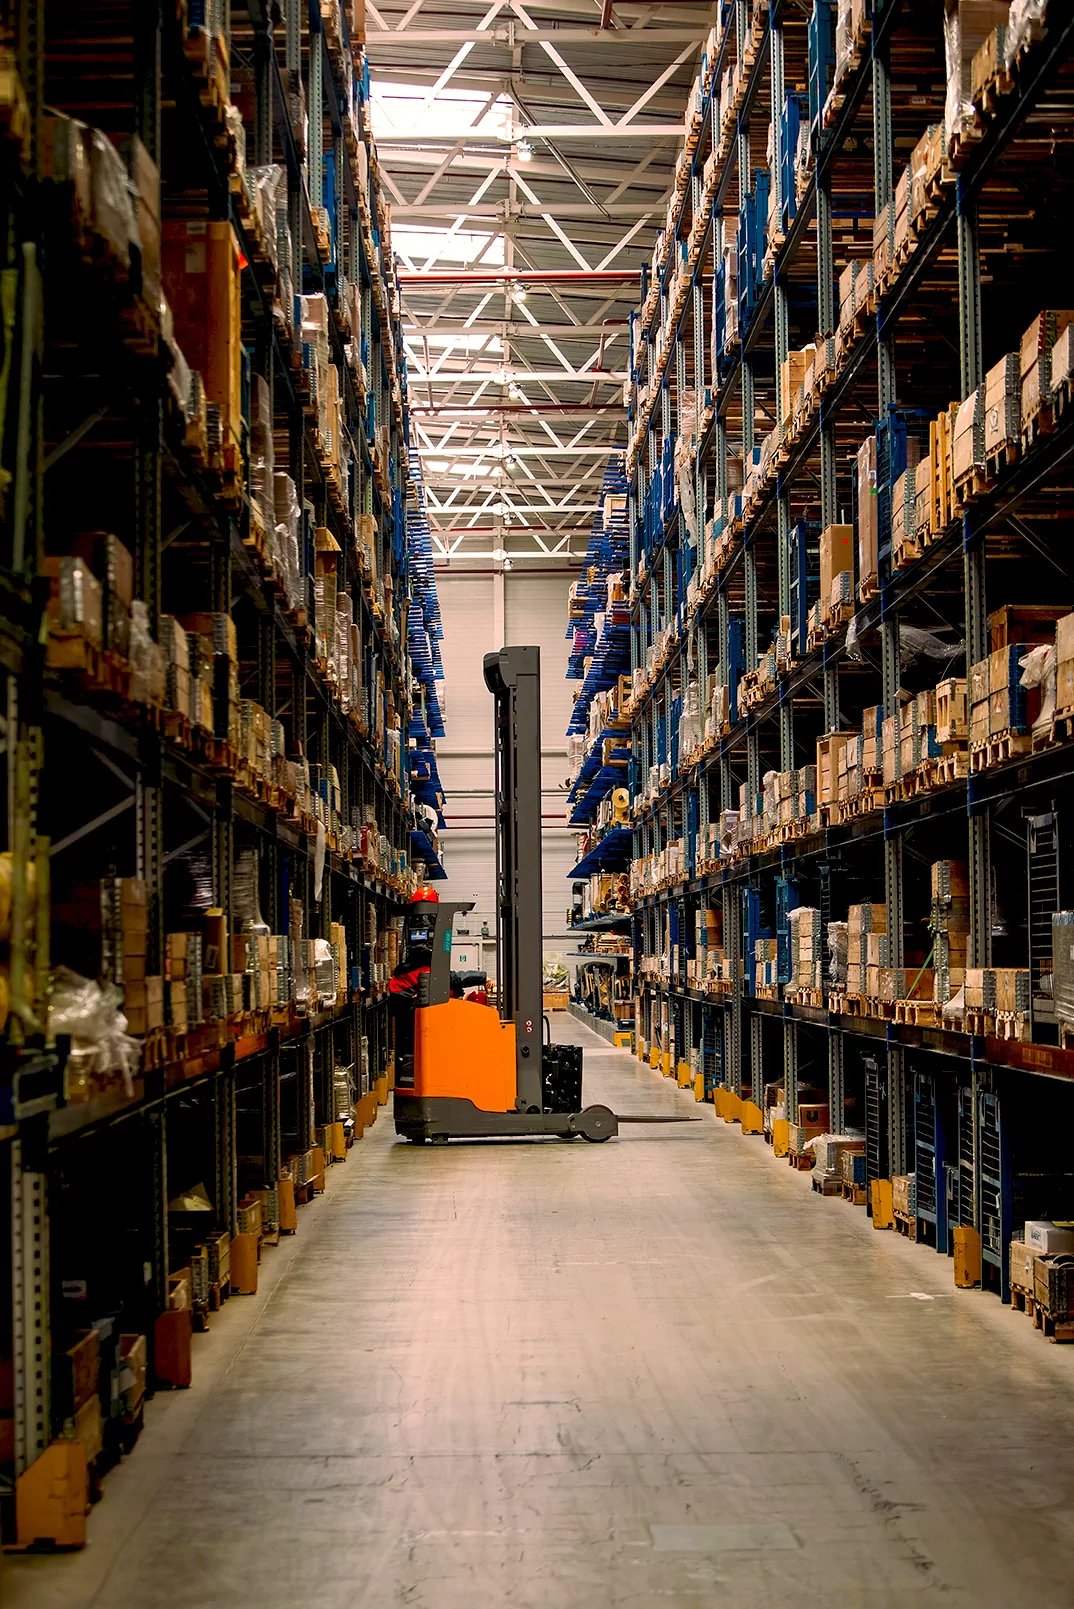 A forklift in a warehouse surrounded by boxes